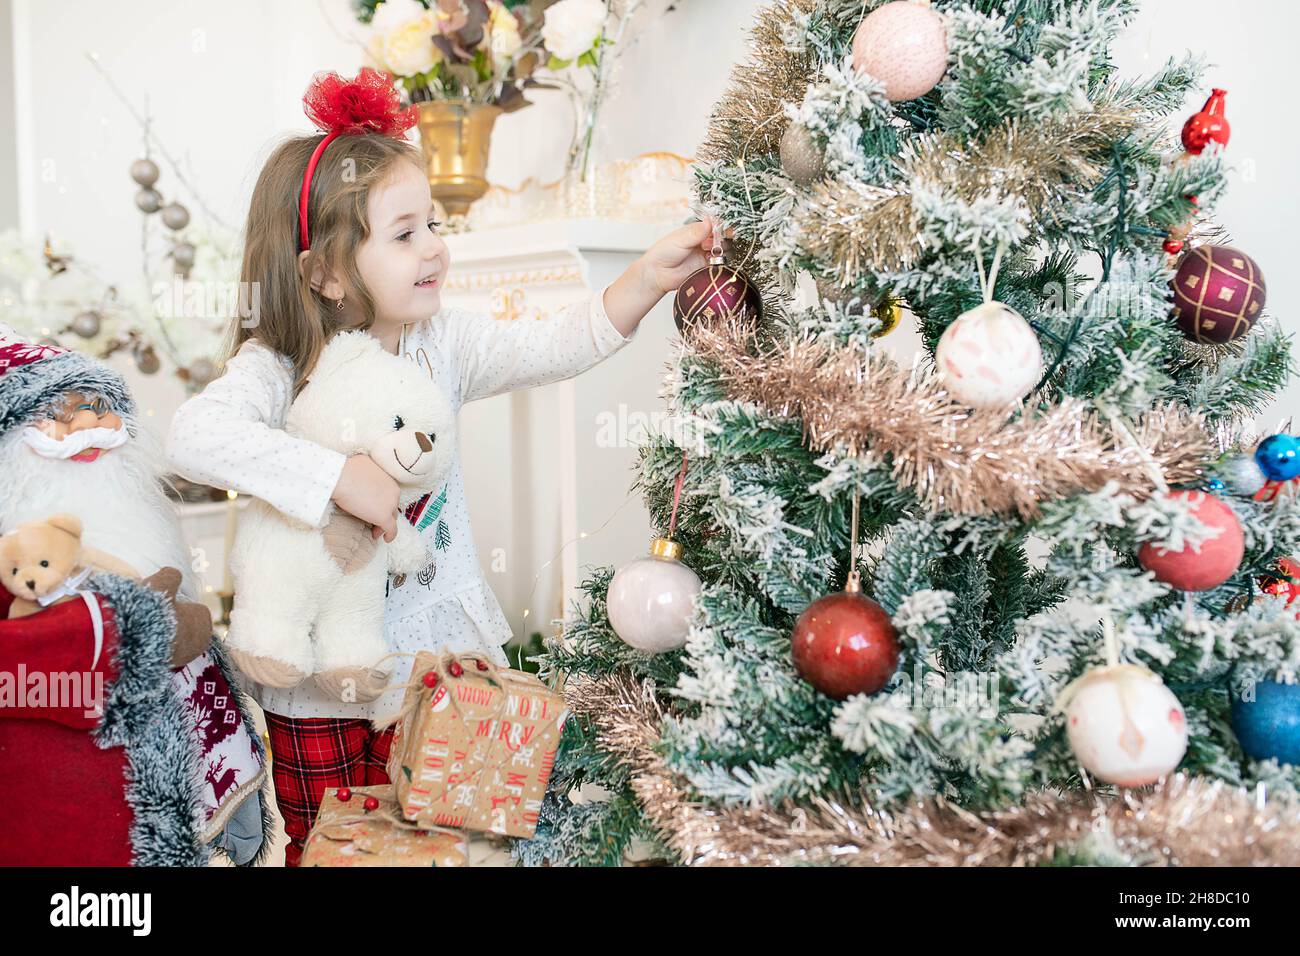 Beautiful Caucasian little girl wearing festive pajamas and holding a cute teddy bear while adding globes and ornaments to a Christmas tree Stock Photo